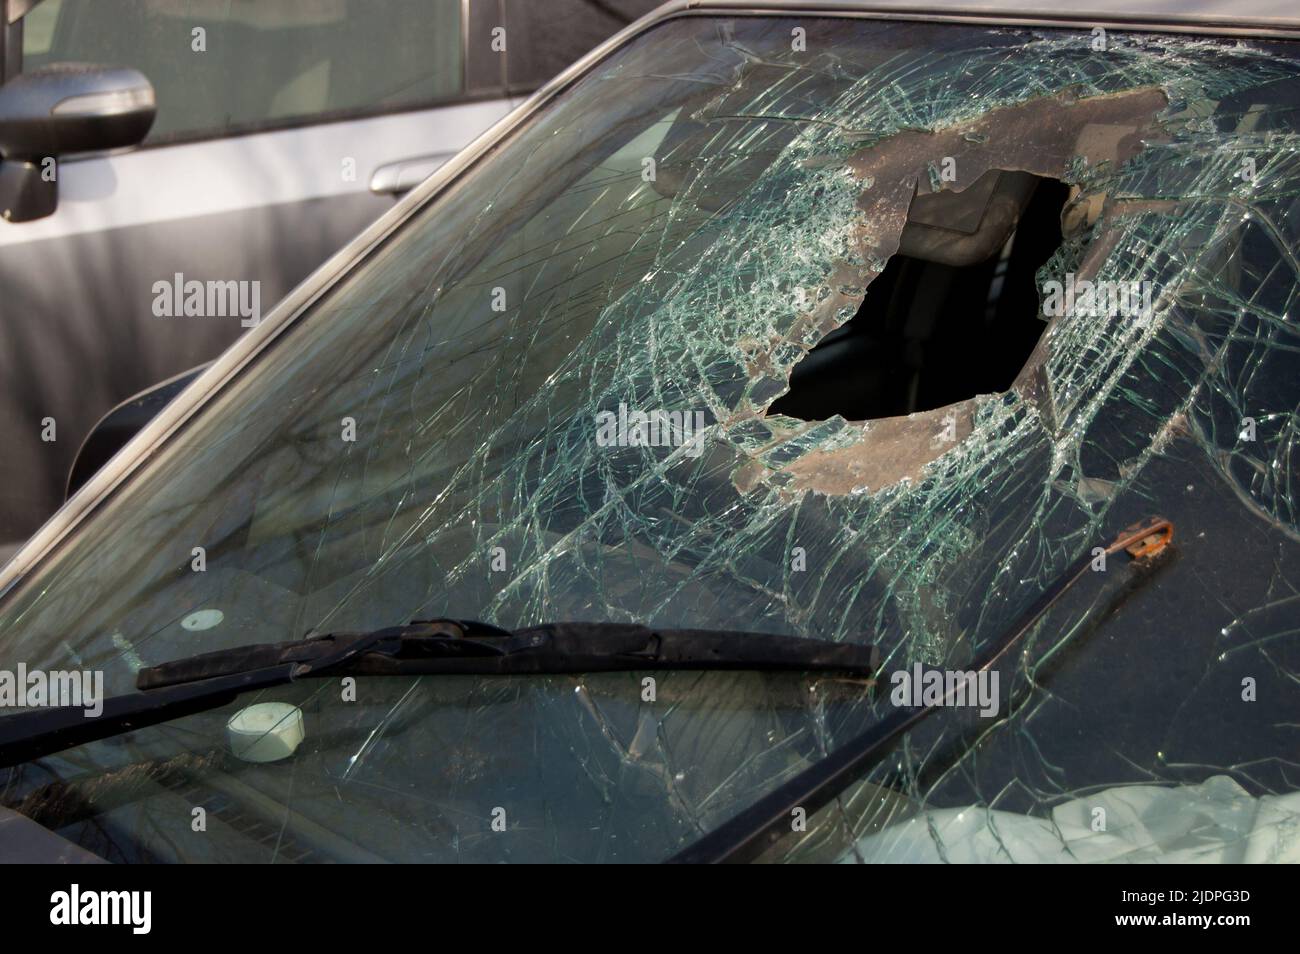 Broken windshield with hole of the car involved in an accident. Stock Photo